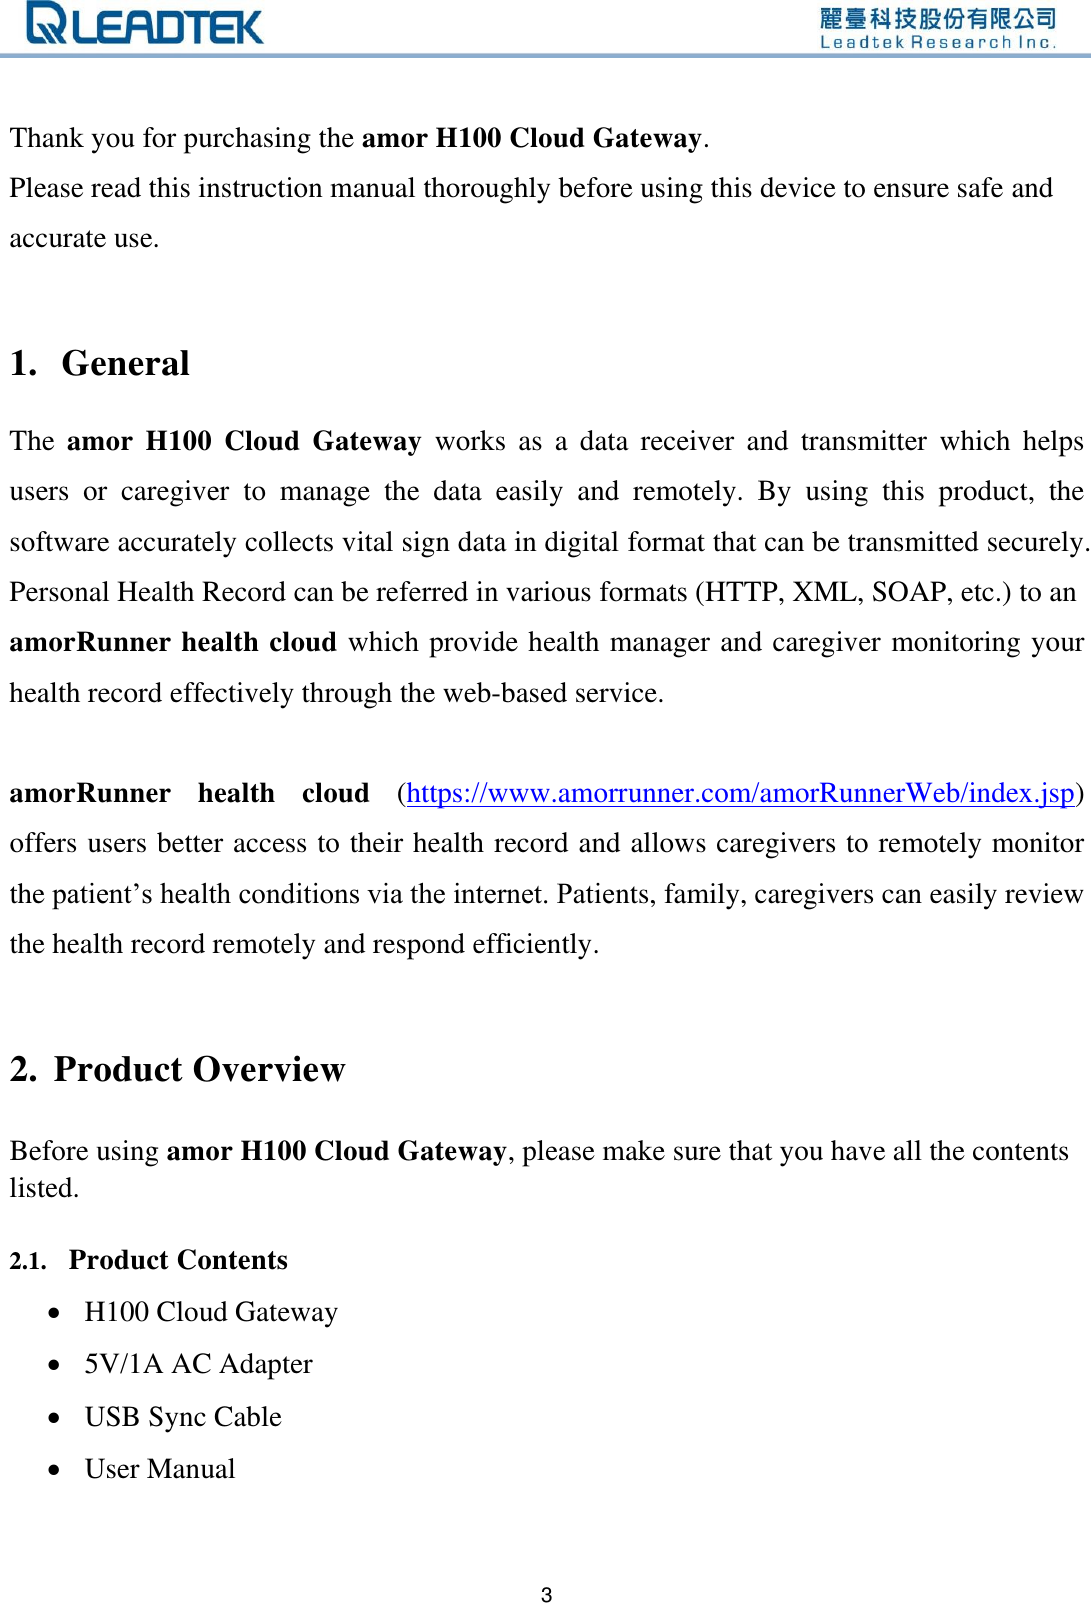   3  Thank you for purchasing the amor H100 Cloud Gateway. Please read this instruction manual thoroughly before using this device to ensure safe and accurate use.  1. General The  amor  H100  Cloud  Gateway  works  as  a  data  receiver  and  transmitter  which  helps users  or  caregiver  to  manage  the  data  easily  and  remotely.  By  using  this  product,  the software accurately collects vital sign data in digital format that can be transmitted securely. Personal Health Record can be referred in various formats (HTTP, XML, SOAP, etc.) to an amorRunner health cloud which provide health manager and caregiver monitoring your health record effectively through the web-based service.    amorRunner  health  cloud  (https://www.amorrunner.com/amorRunnerWeb/index.jsp) offers users better access to their health record and allows caregivers to remotely monitor the patient’s health conditions via the internet. Patients, family, caregivers can easily review the health record remotely and respond efficiently.  2. Product Overview Before using amor H100 Cloud Gateway, please make sure that you have all the contents listed.  2.1. Product Contents  H100 Cloud Gateway  5V/1A AC Adapter  USB Sync Cable  User Manual  